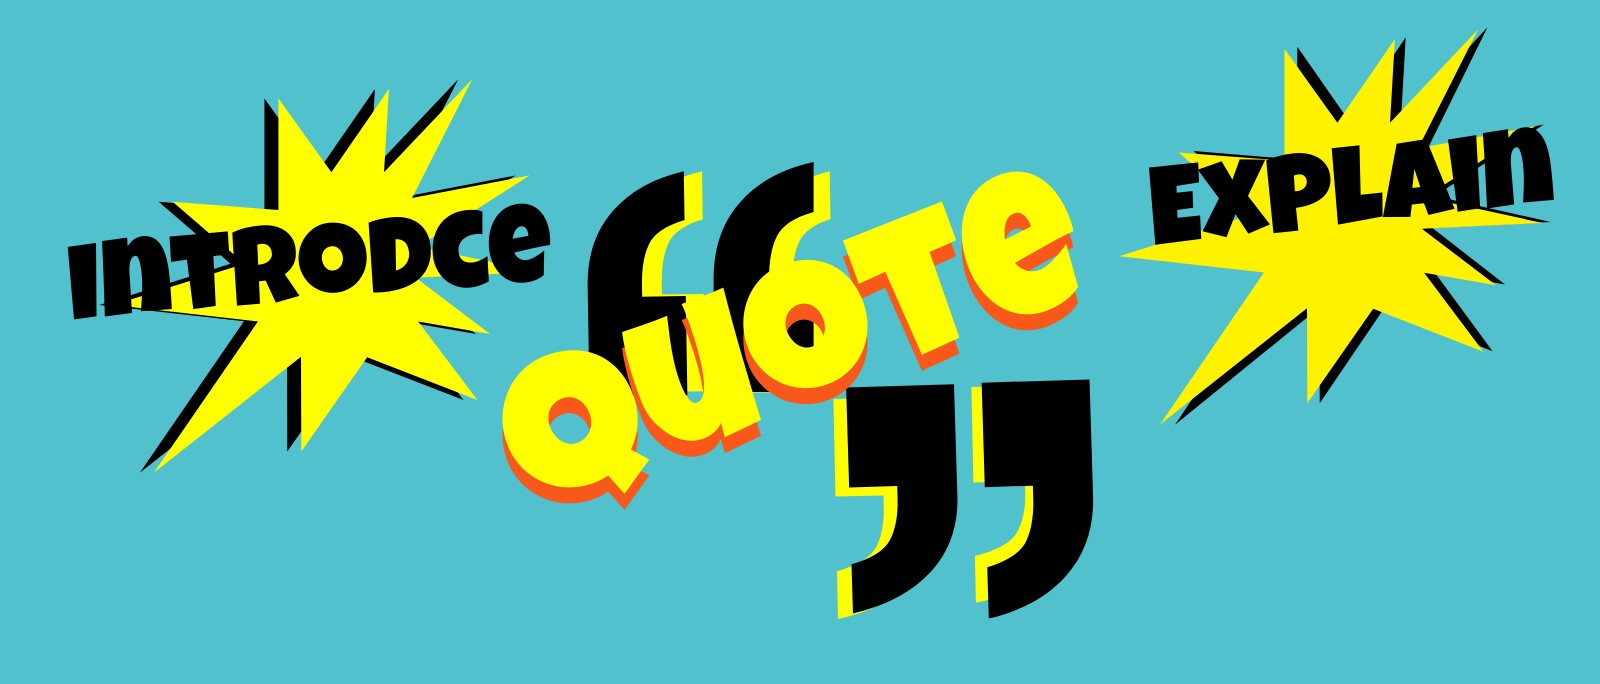 An all-text graphic reminds readers to introduce, quote, explain